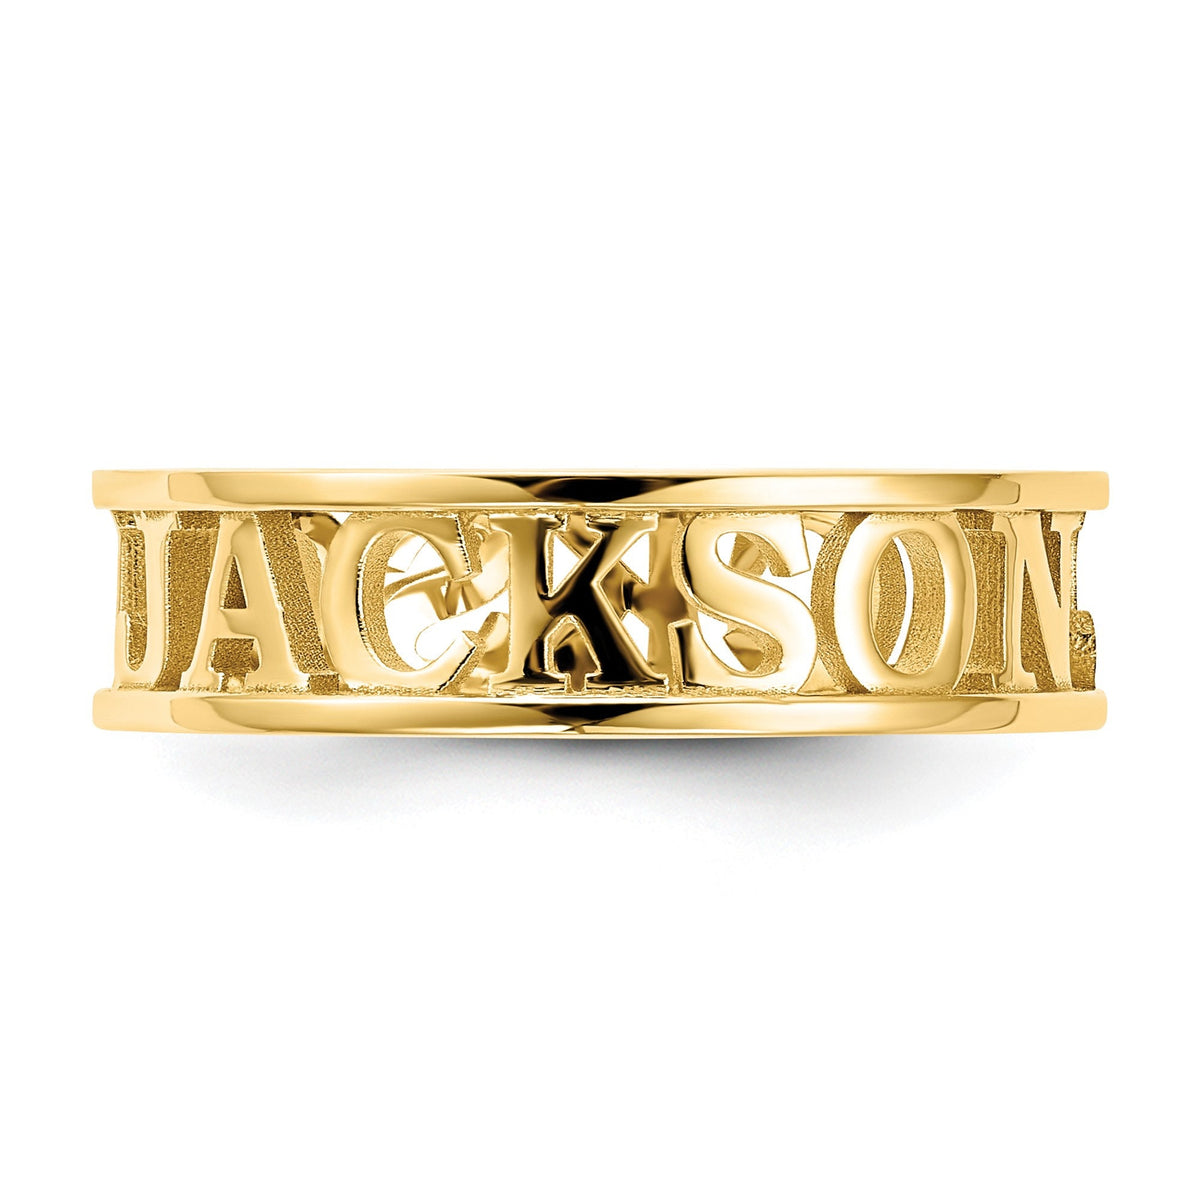 Personalized Name Ring Available in 10k Yellow Gold, 10k White Gold, Sterling Silver or Gold Plated Silver Gift Box Included Ring Sizes 8-12